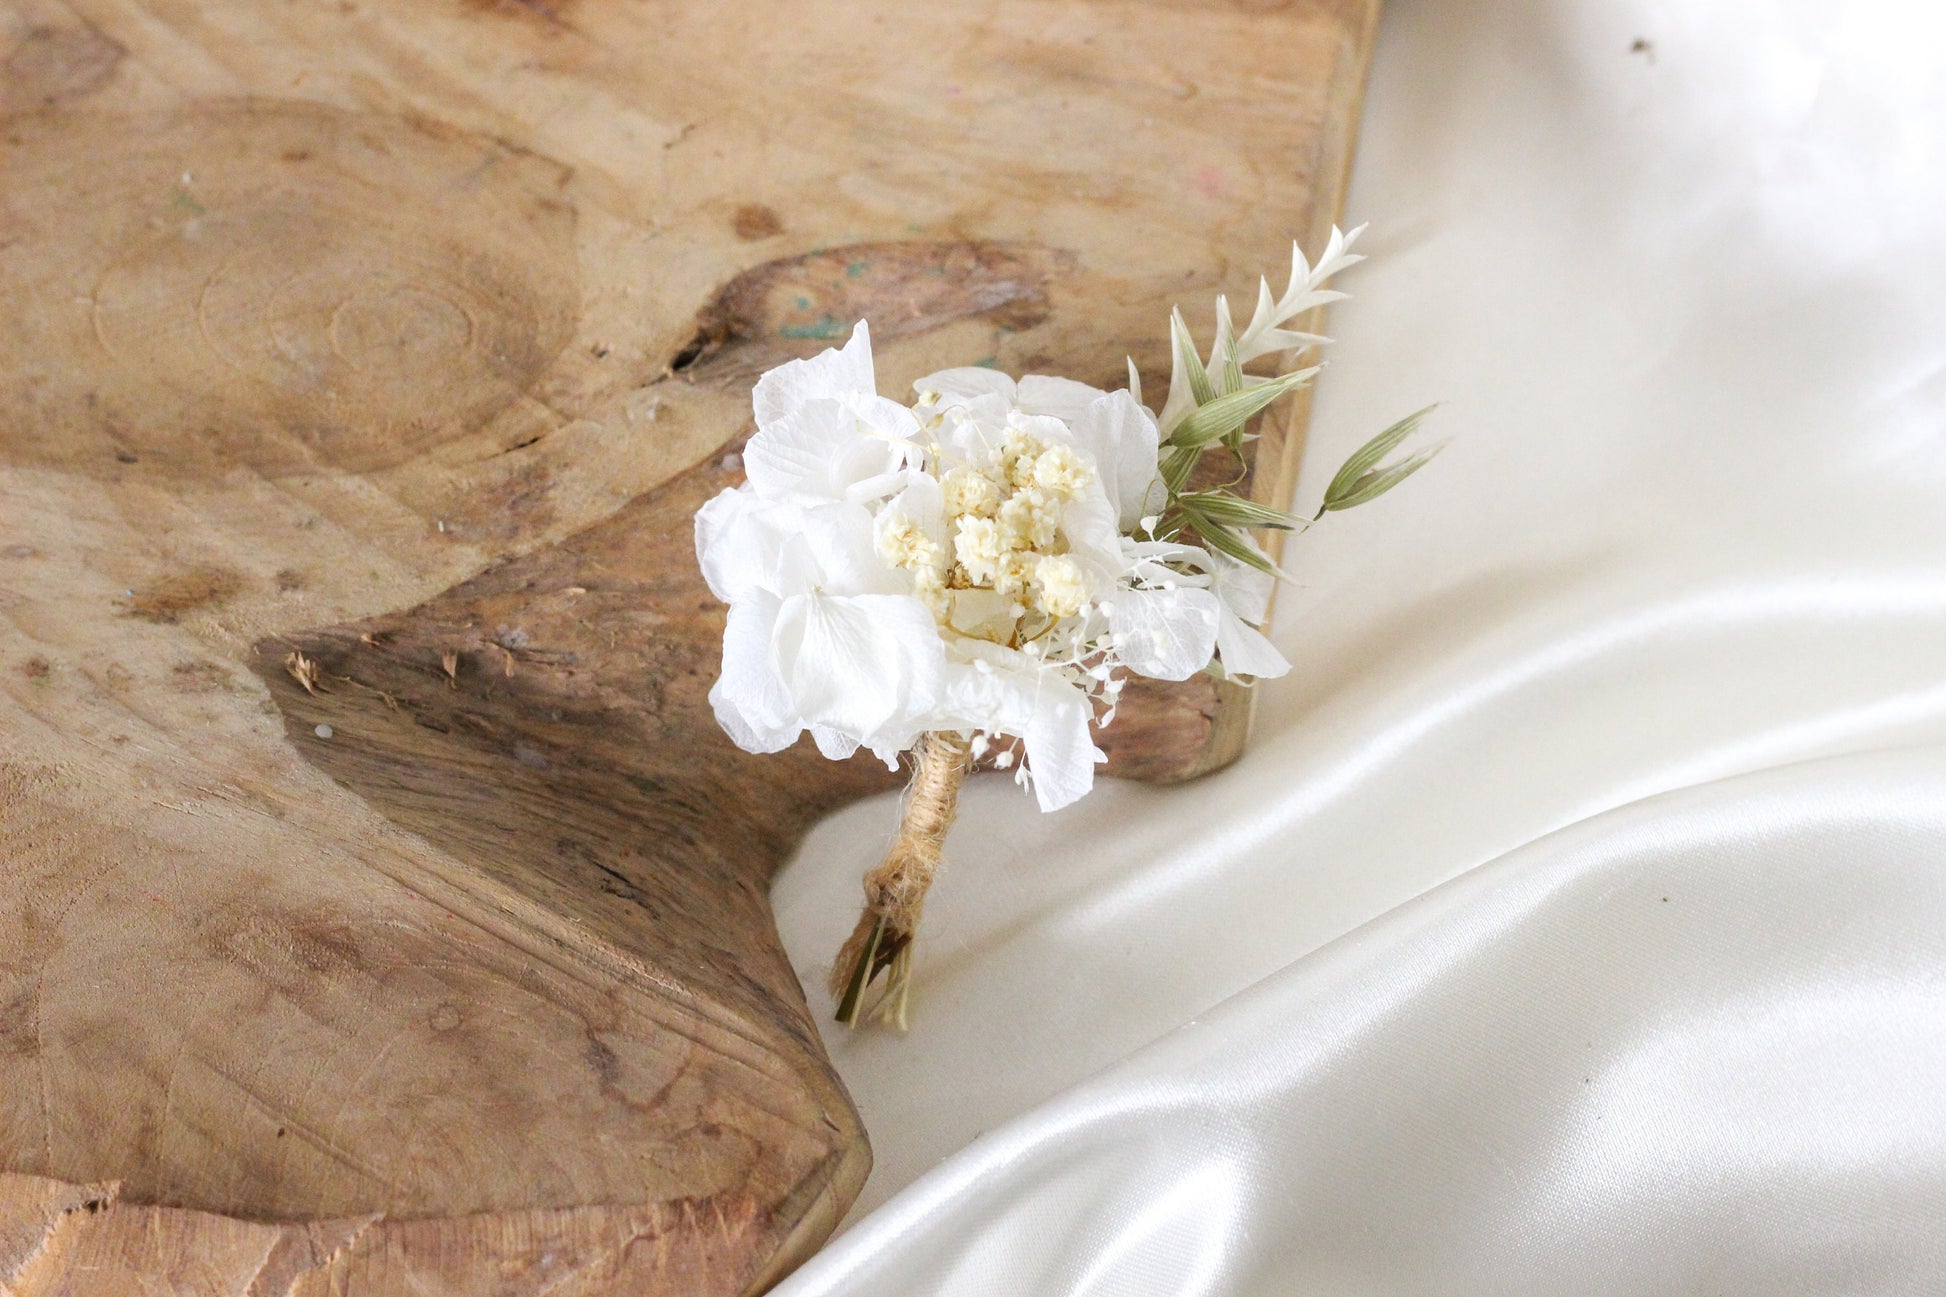 AVA wedding boutonniere/ buttonhole for bride and groom